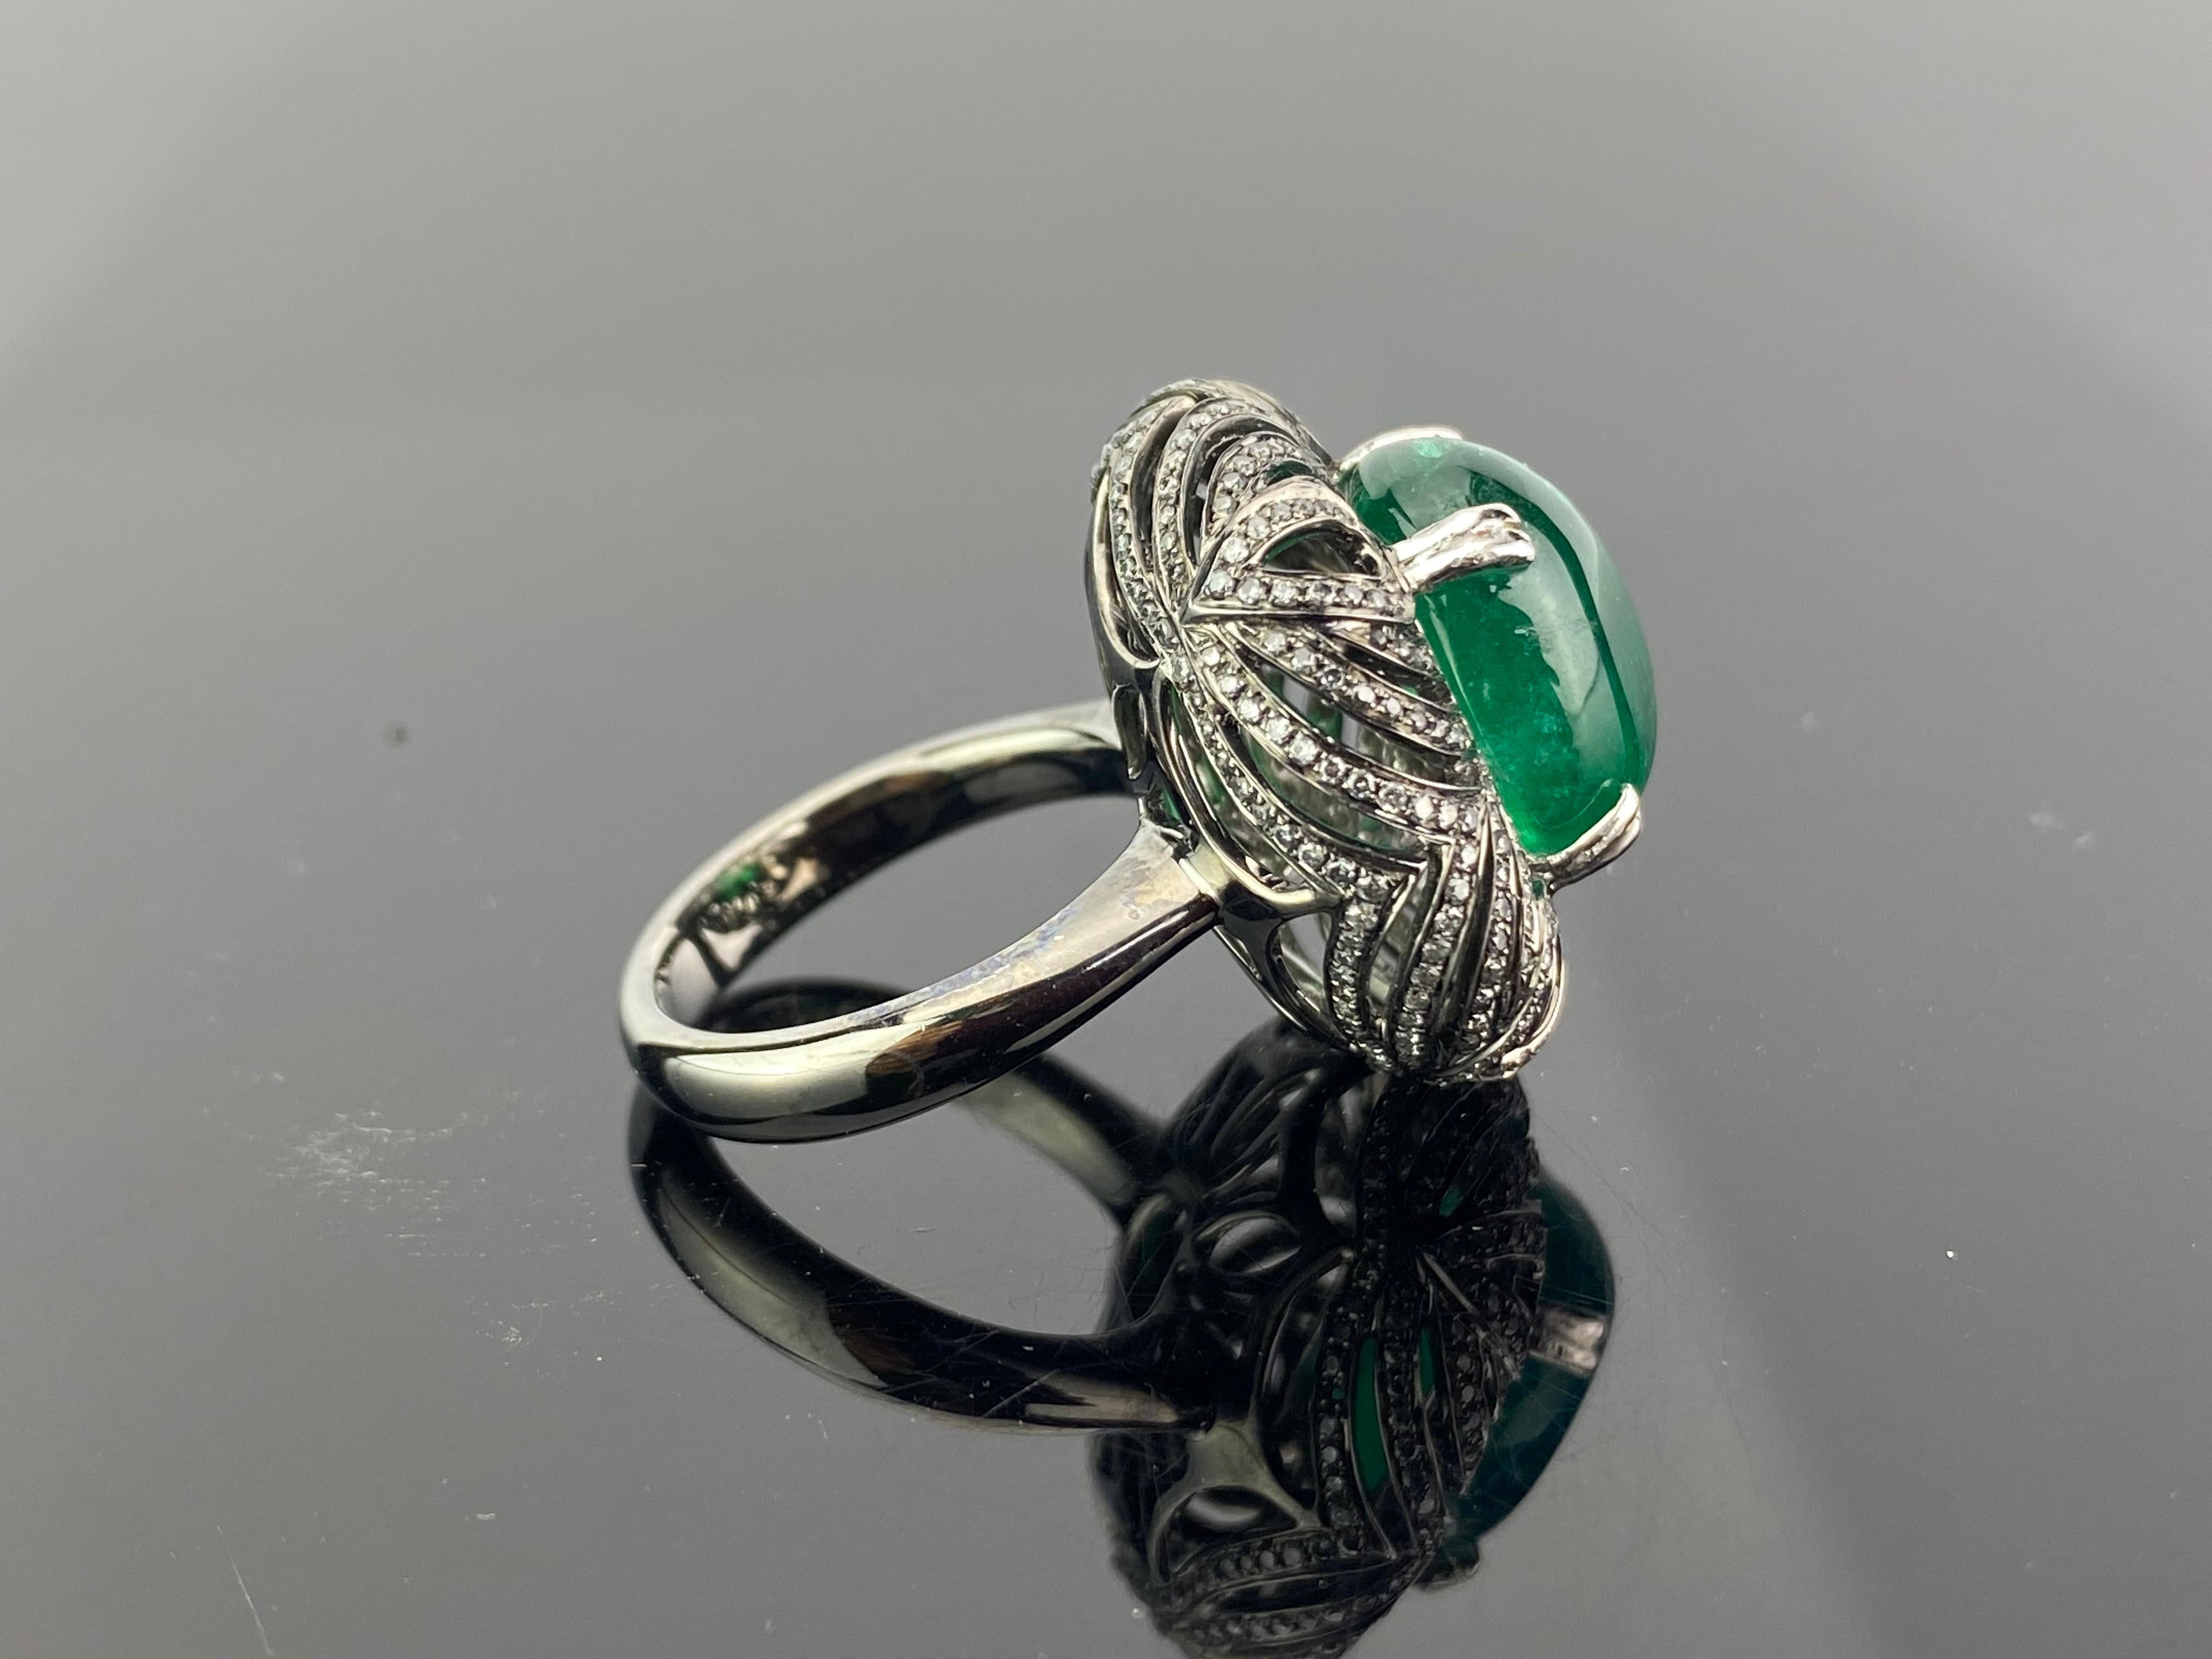 A very unique 10.80 carat Zambian Emerald and 1.36 carat White Diamond ring, set in 13.8 grams solid 18K Gold polished with Black Rhodium. Currently sized at US 7, can be altered. 
We provide free shipping. And we accept returns!